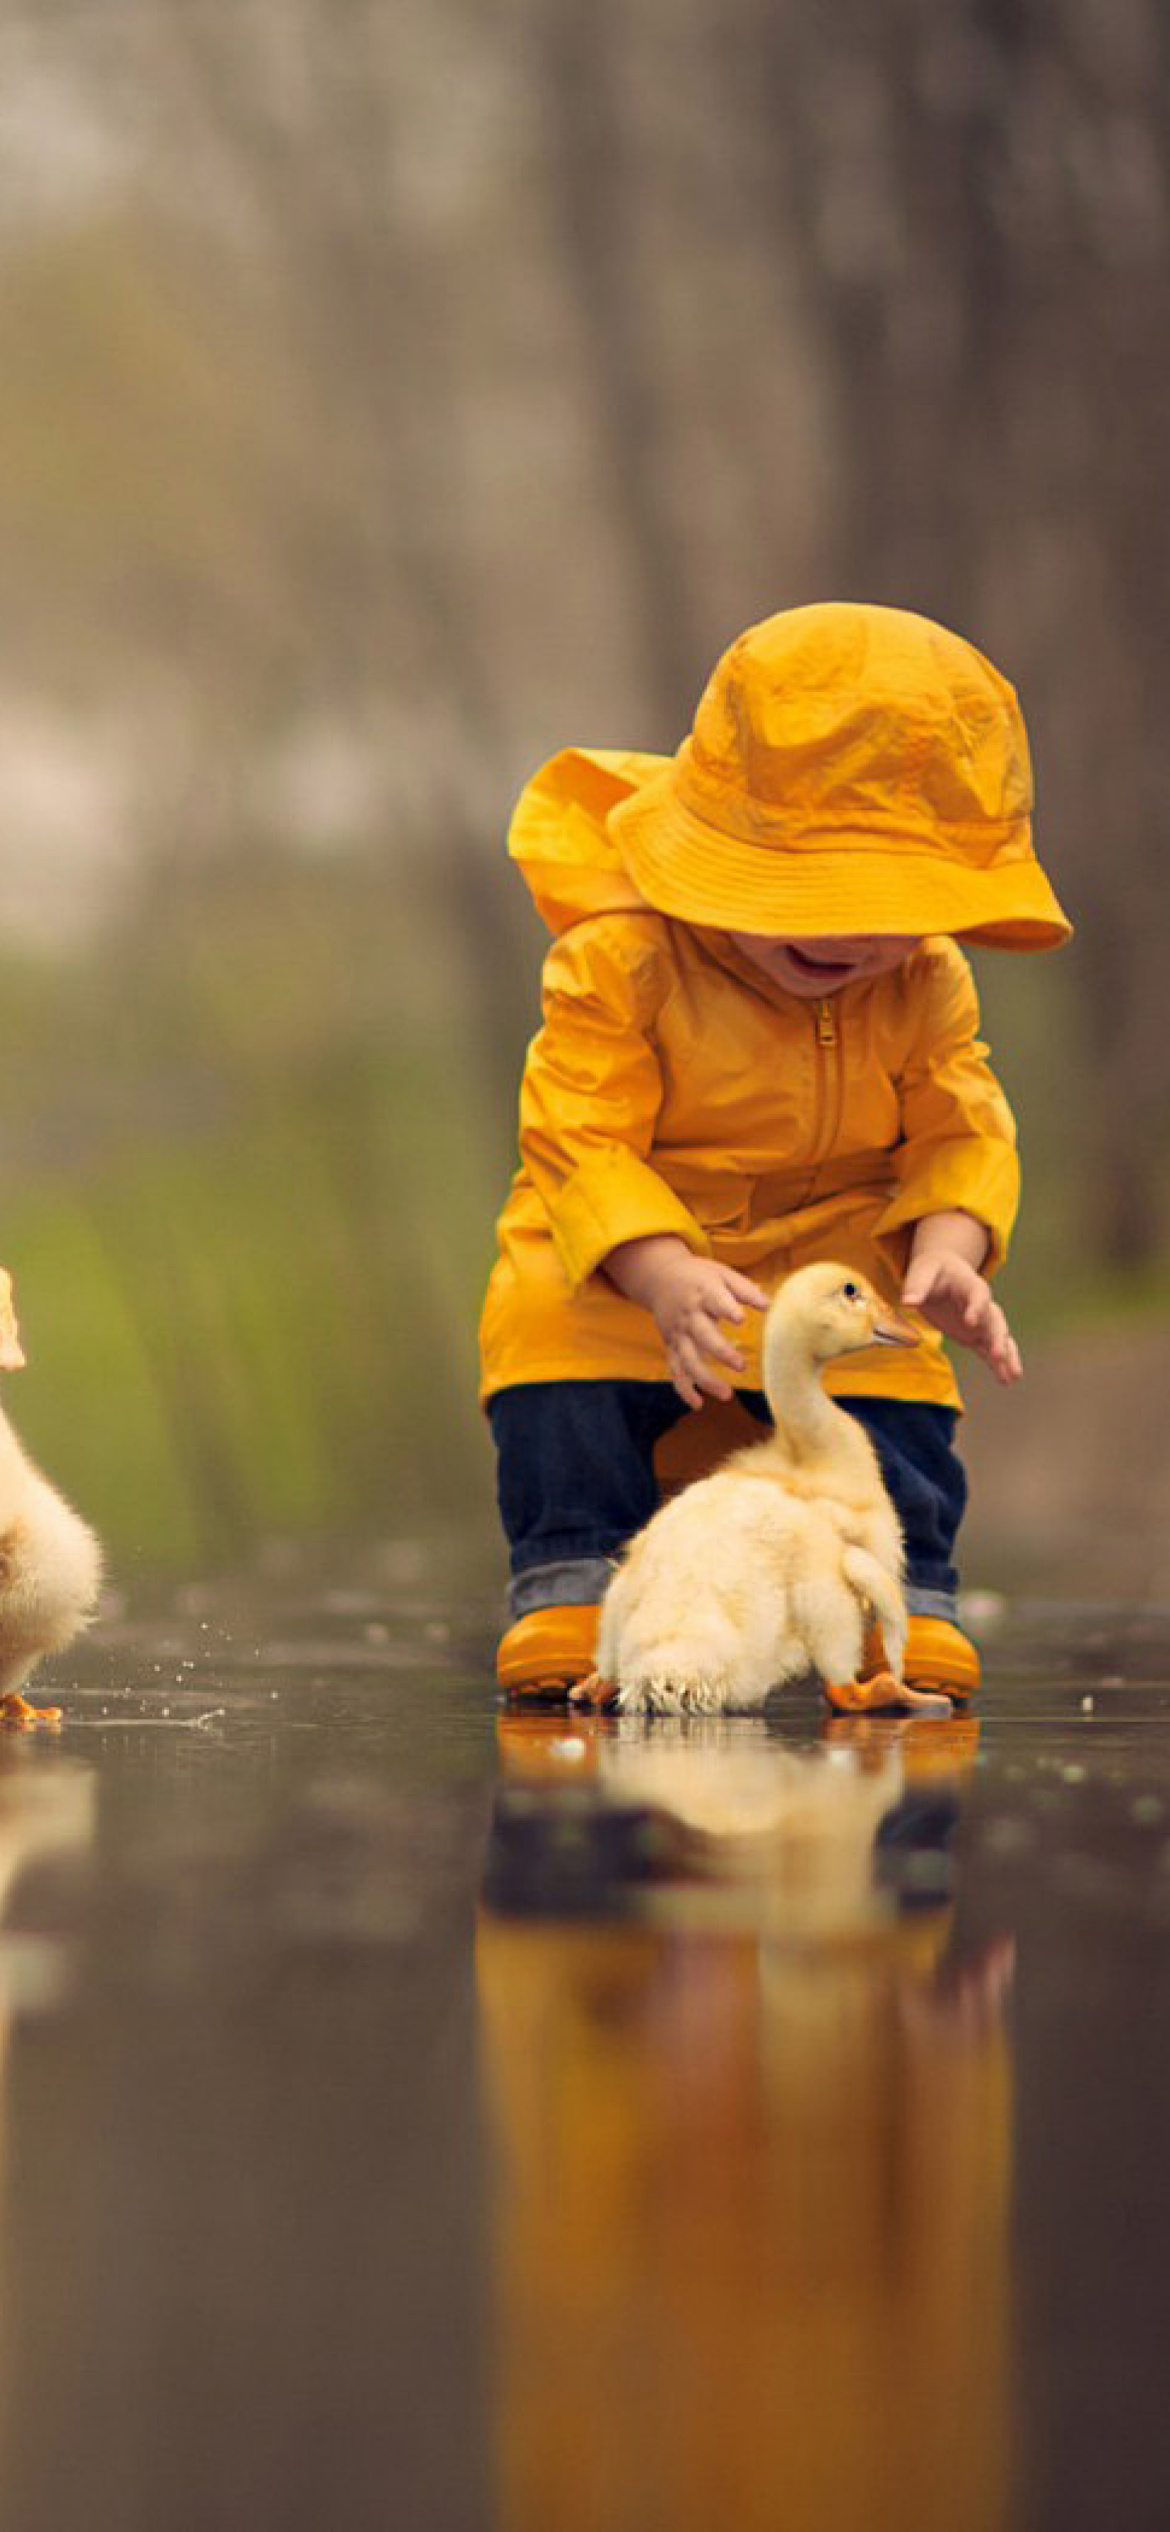 Goslings in Puddle wallpaper 1170x2532